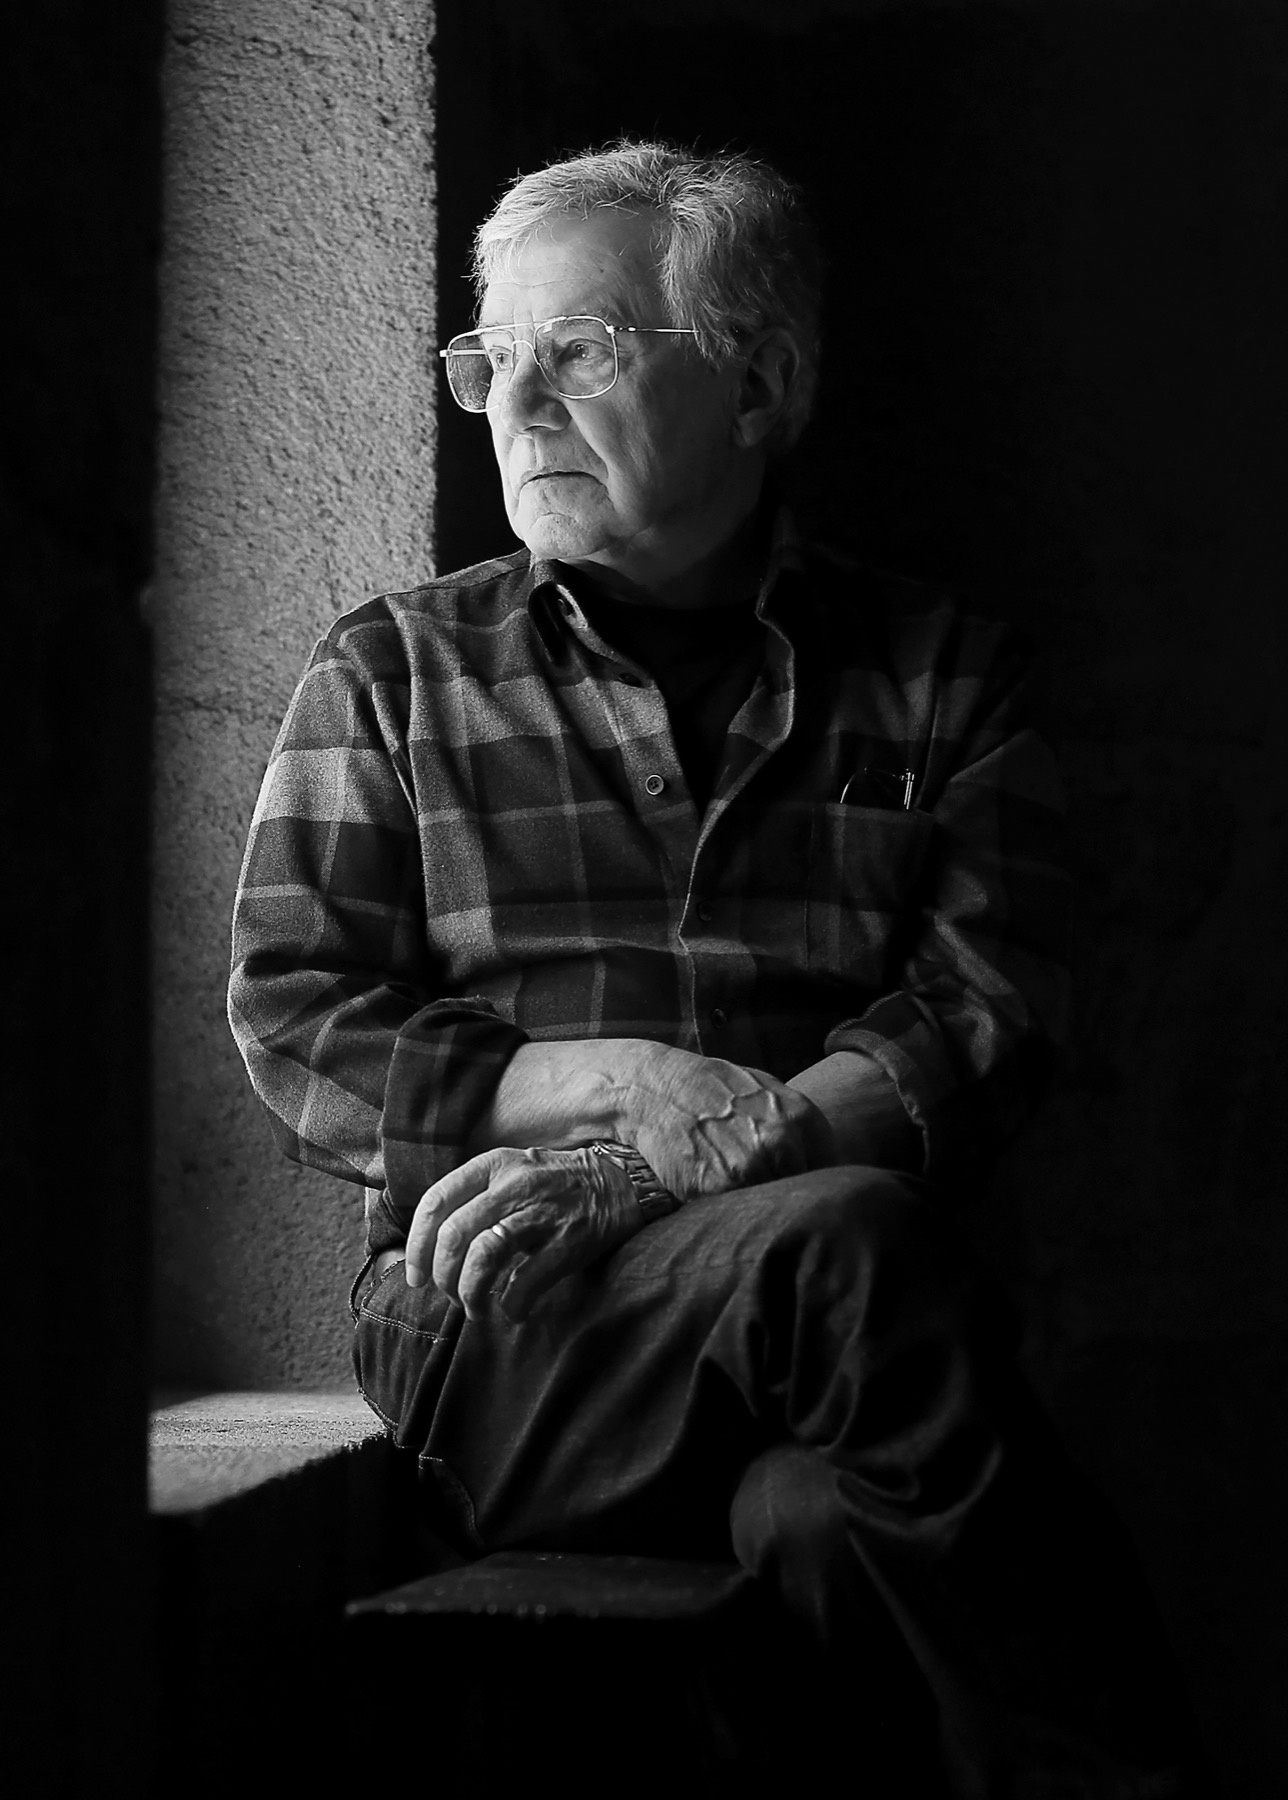 a portrait black and white photo of an older white man looks out from a dark room out to a brighter window